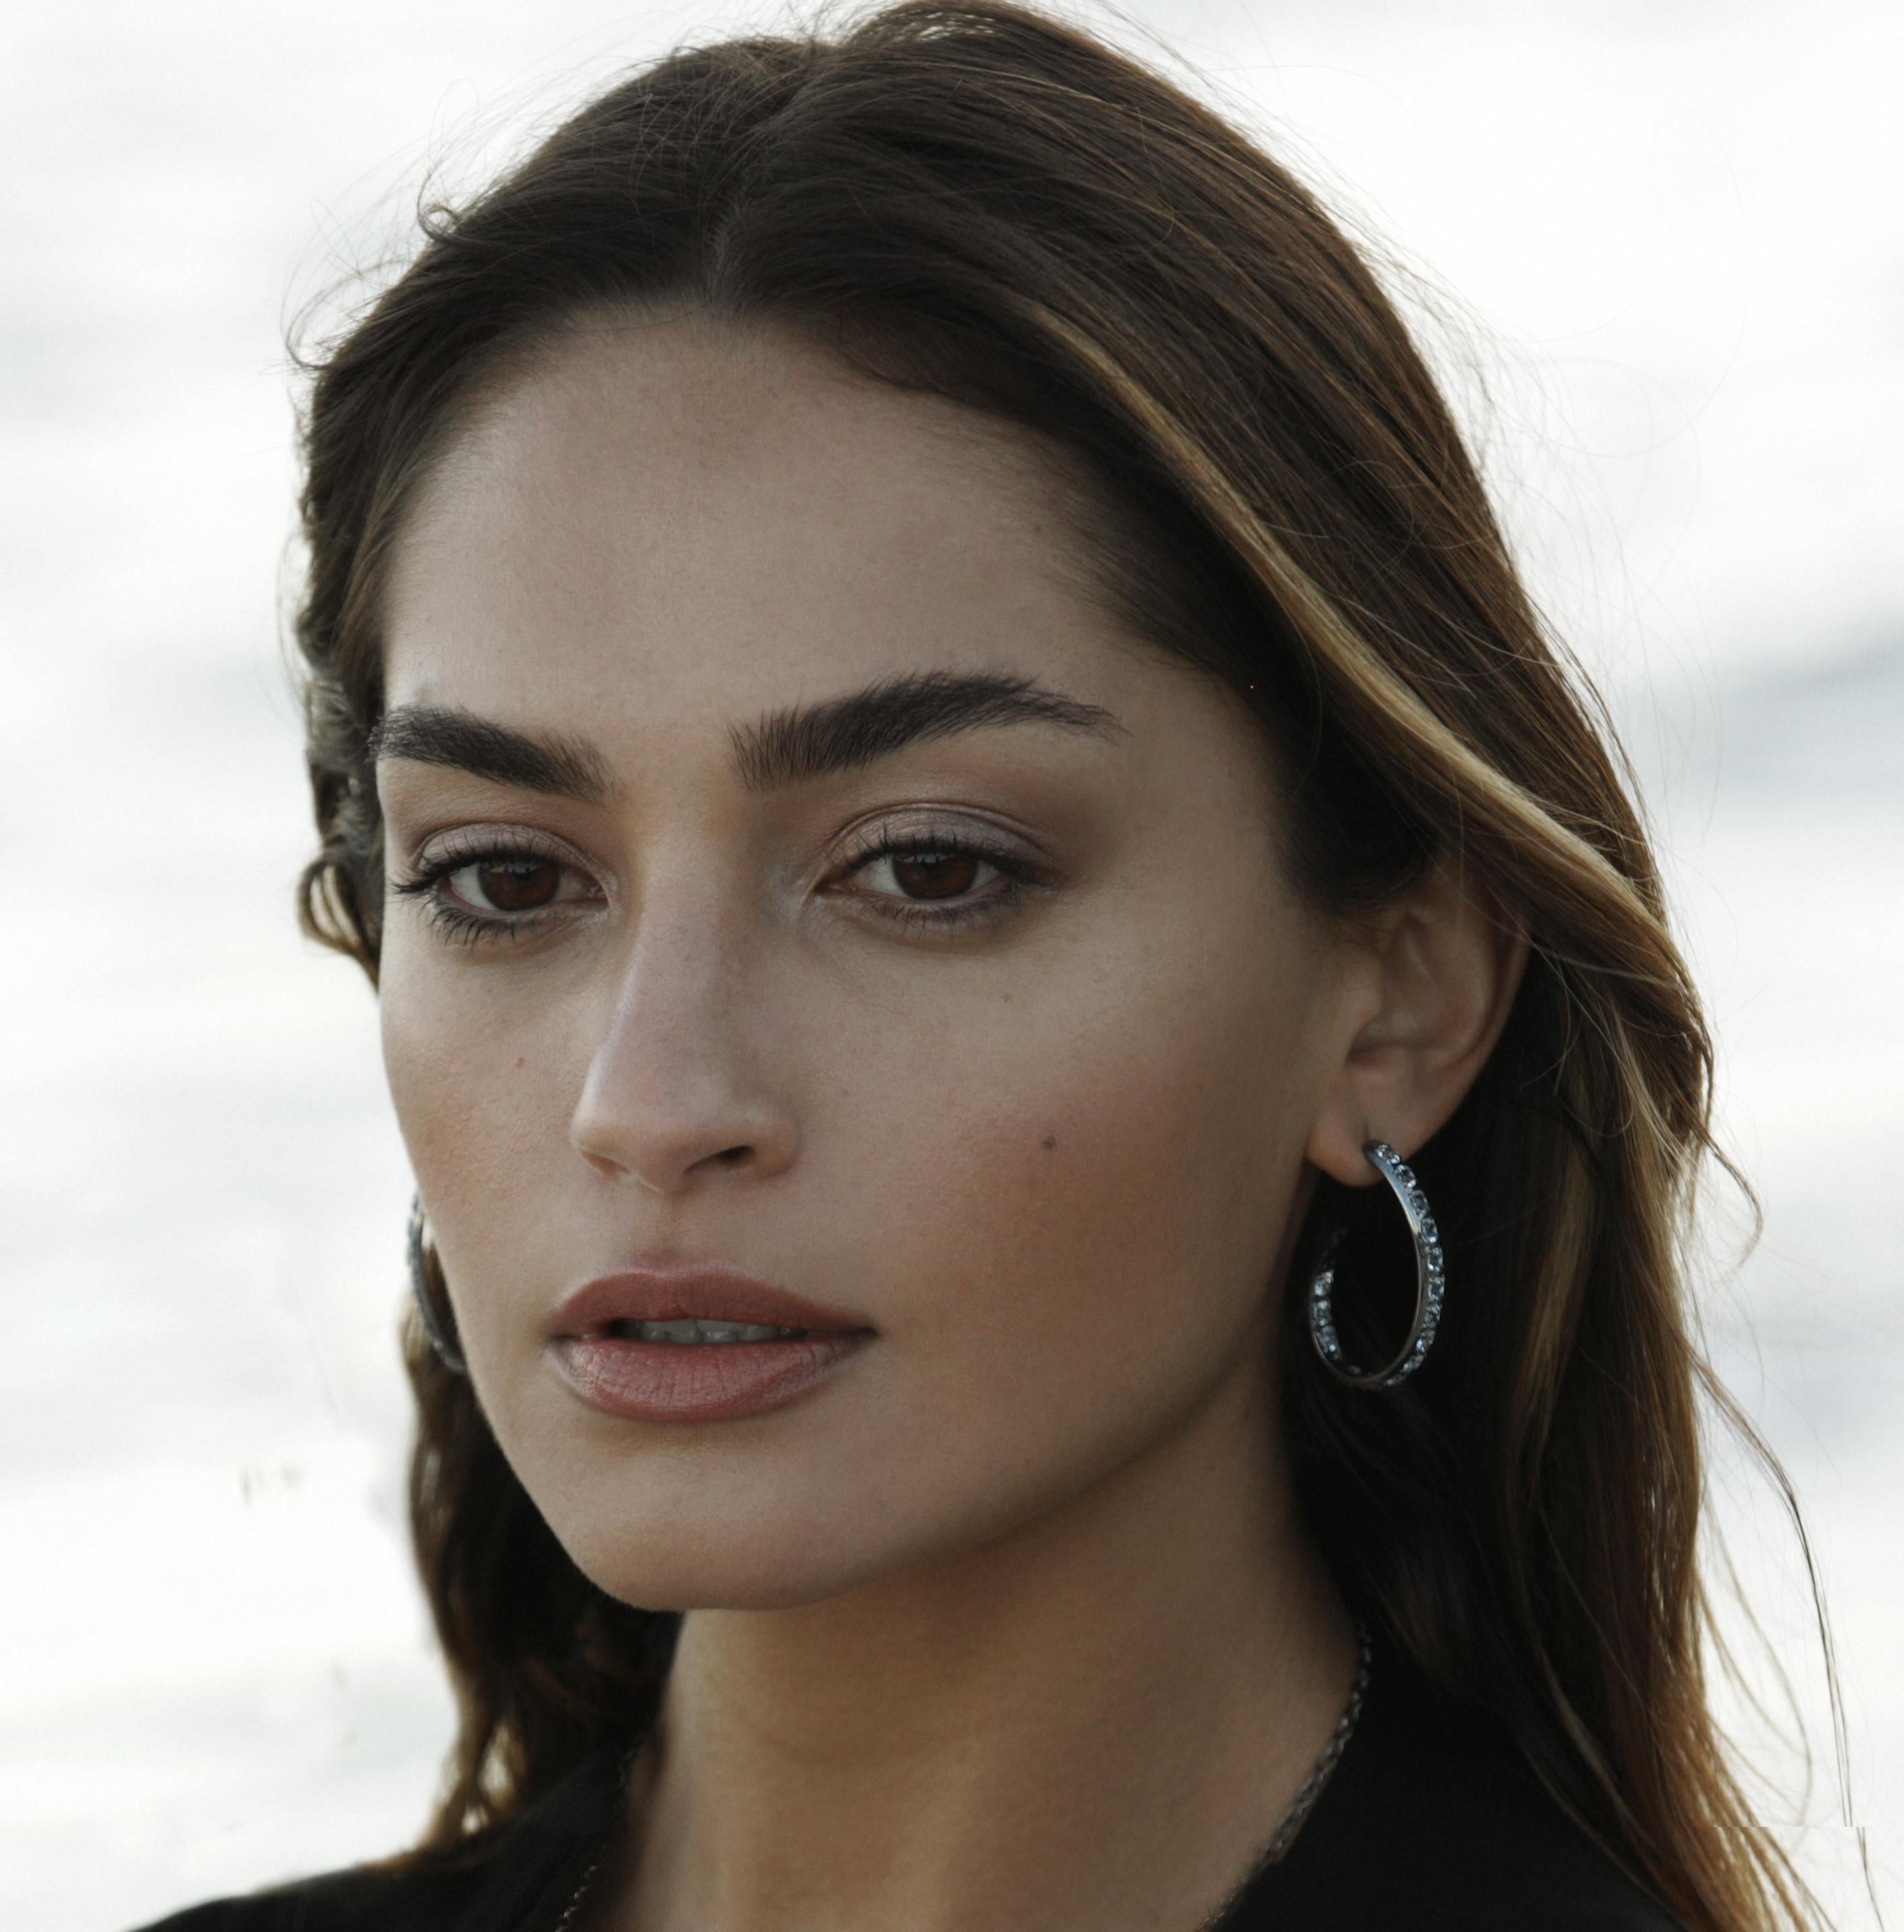 Edgy, lightweight bands of light, the Flamingo hoop earrings in sterling silver and white topaz add effortless dress-up to a casual look, boosting poignant originality and flair by day and by night.
The artist's logo is creatively finessed into the